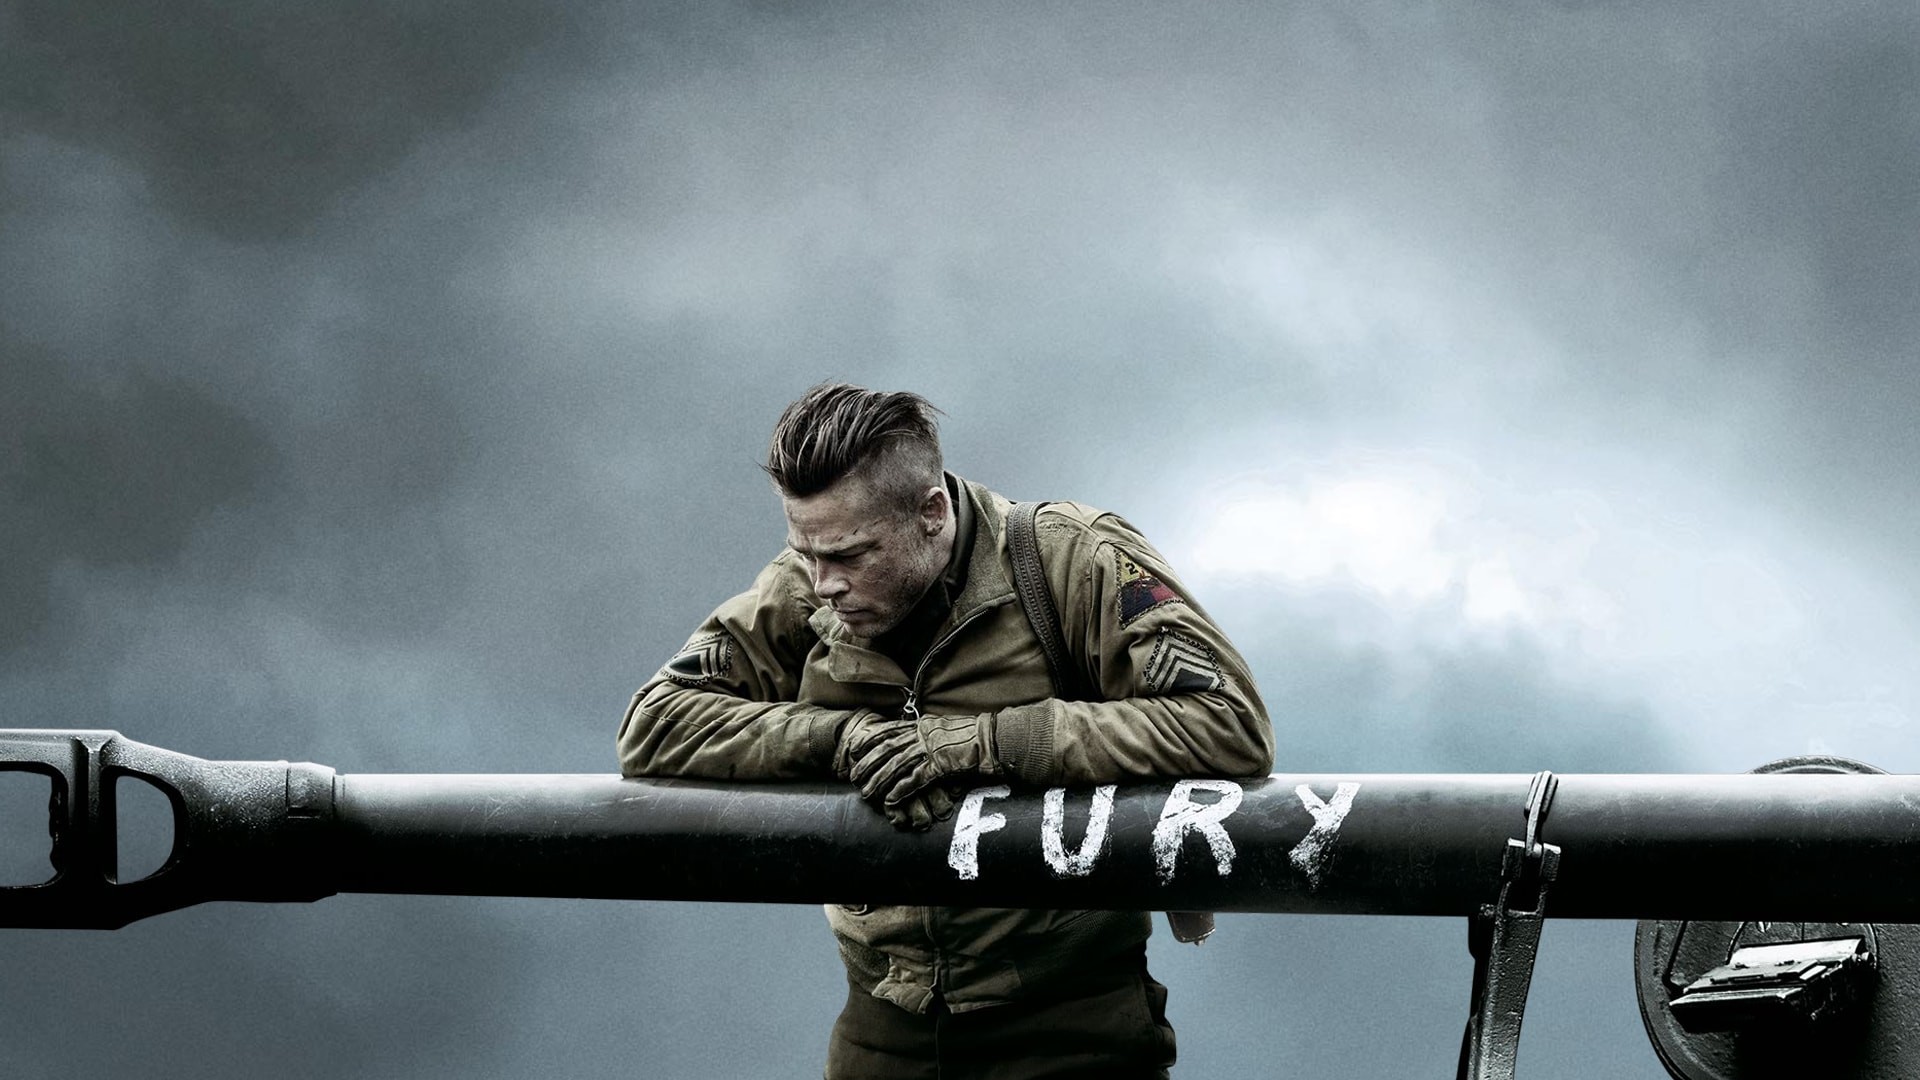 1920x1080 Fury Wallpapers Fury widescreen wallpapers